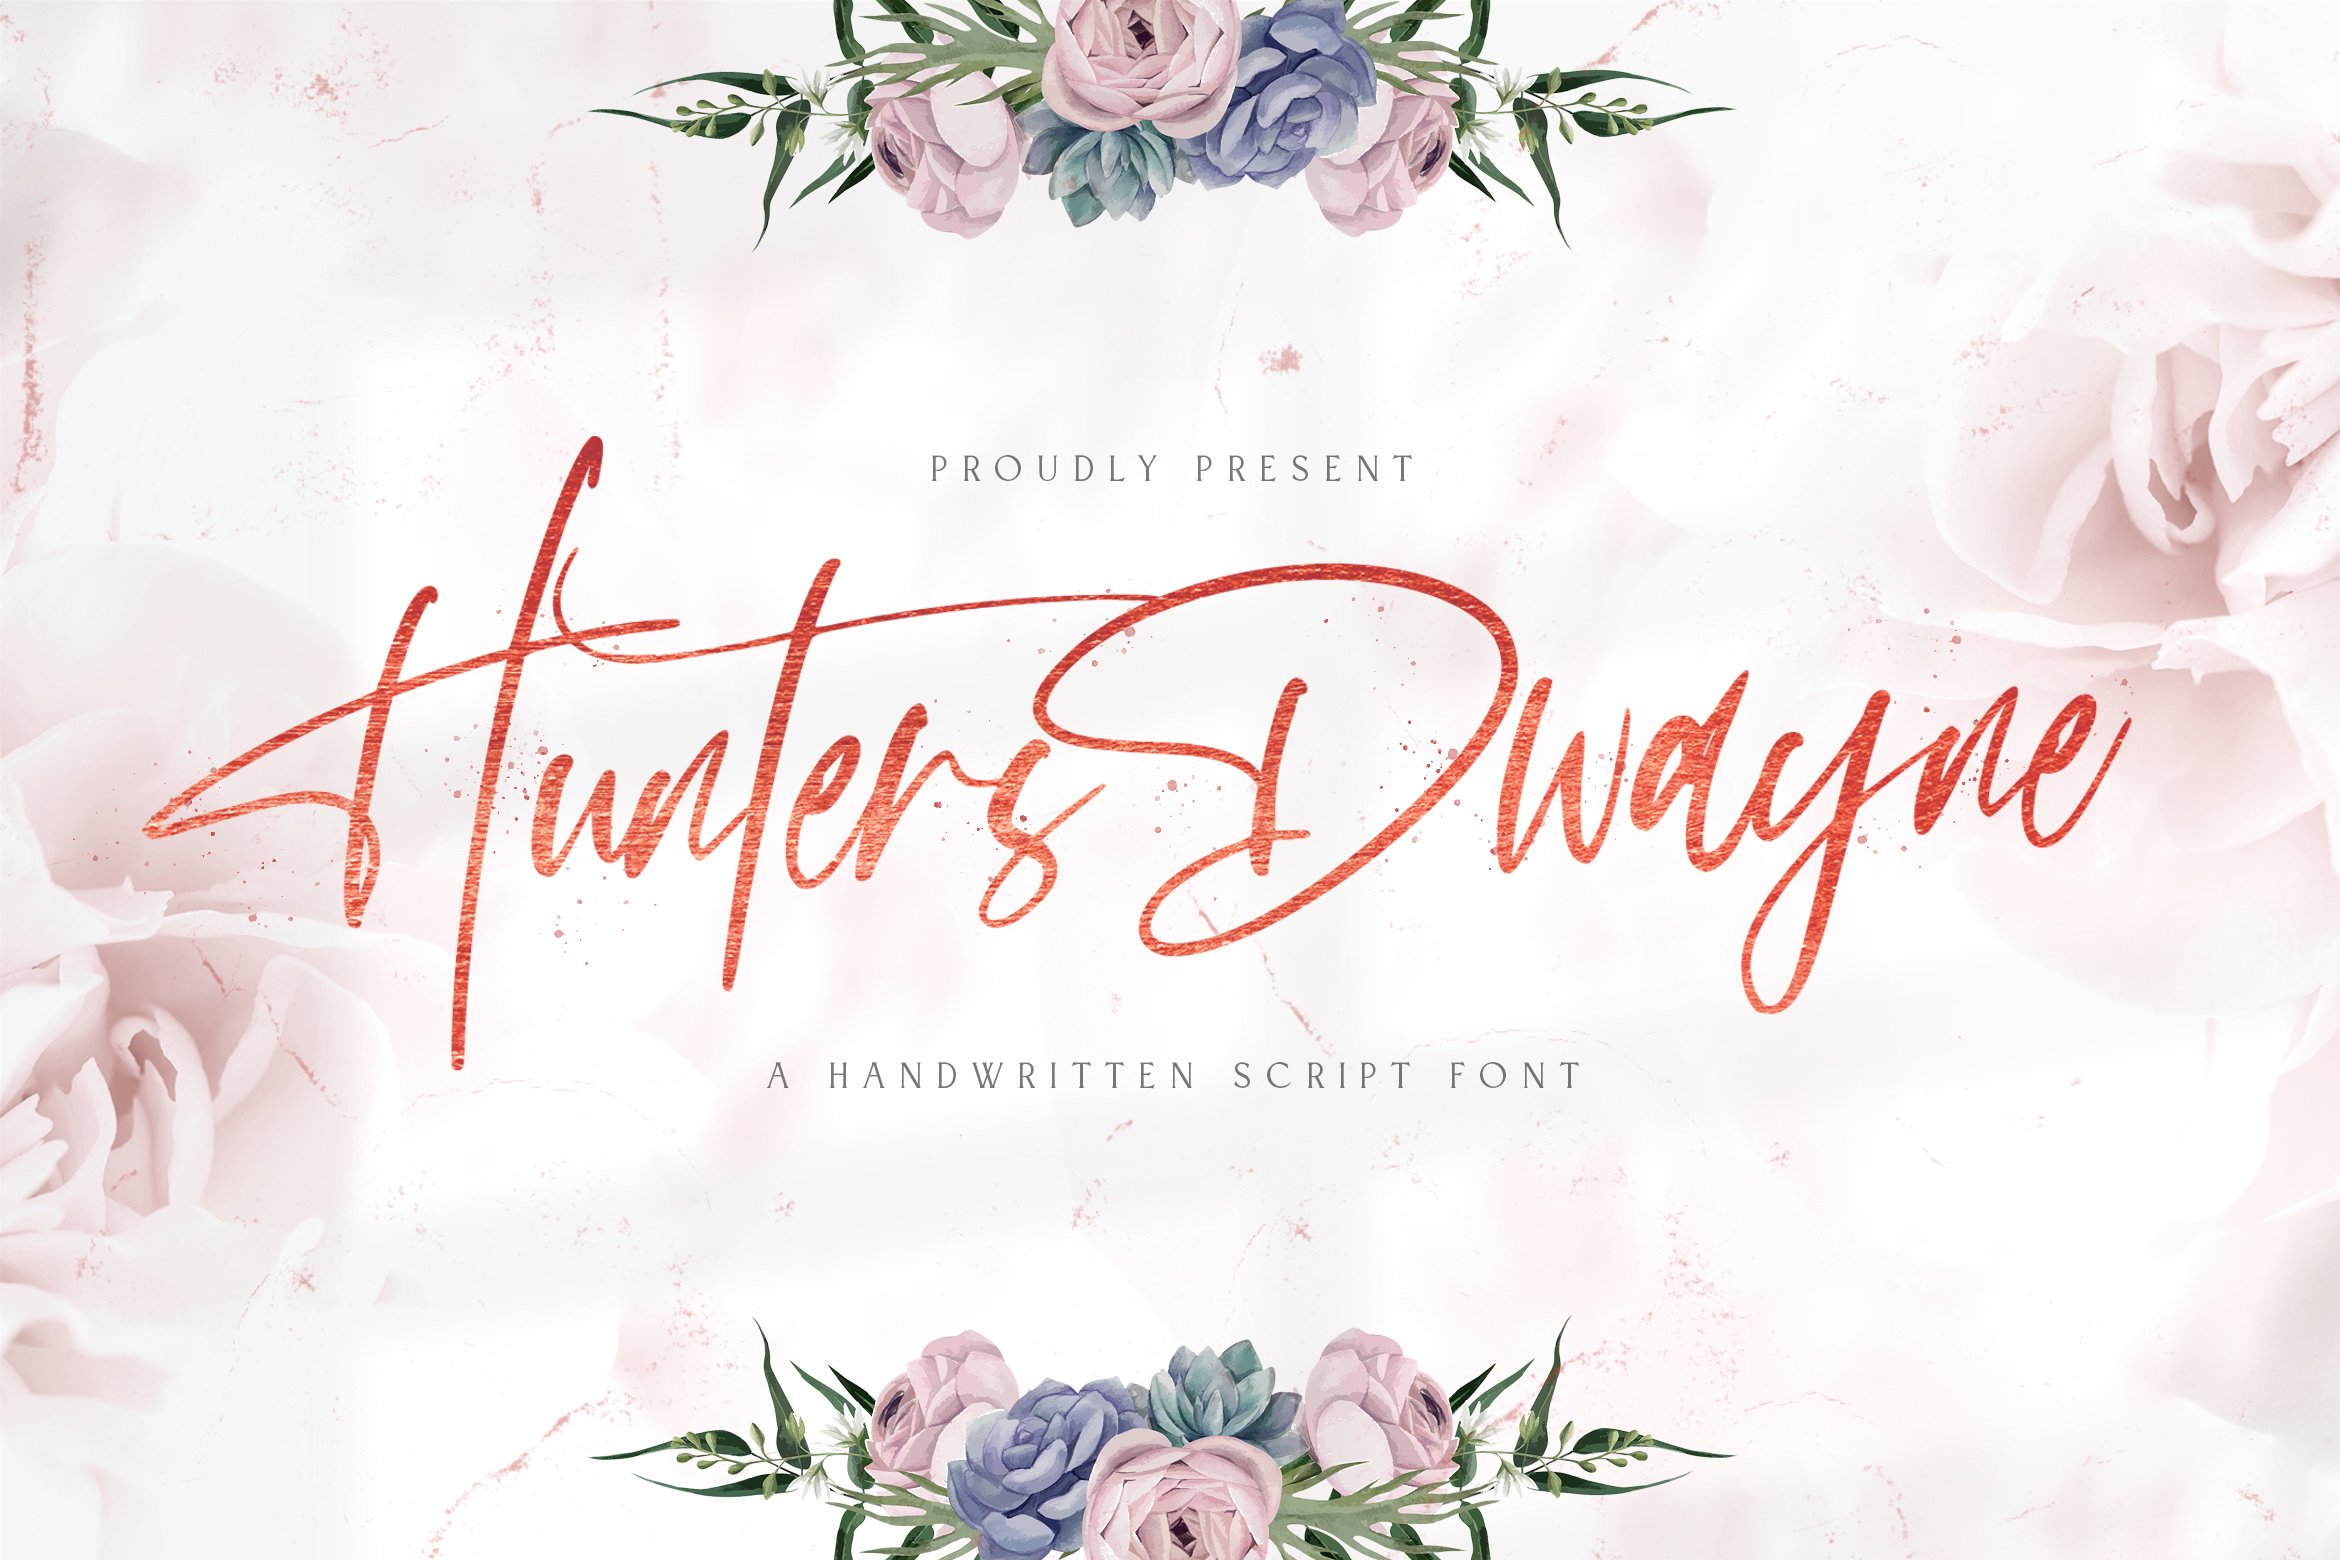 Hunthers Dwayne - Handwritten Font cover image.